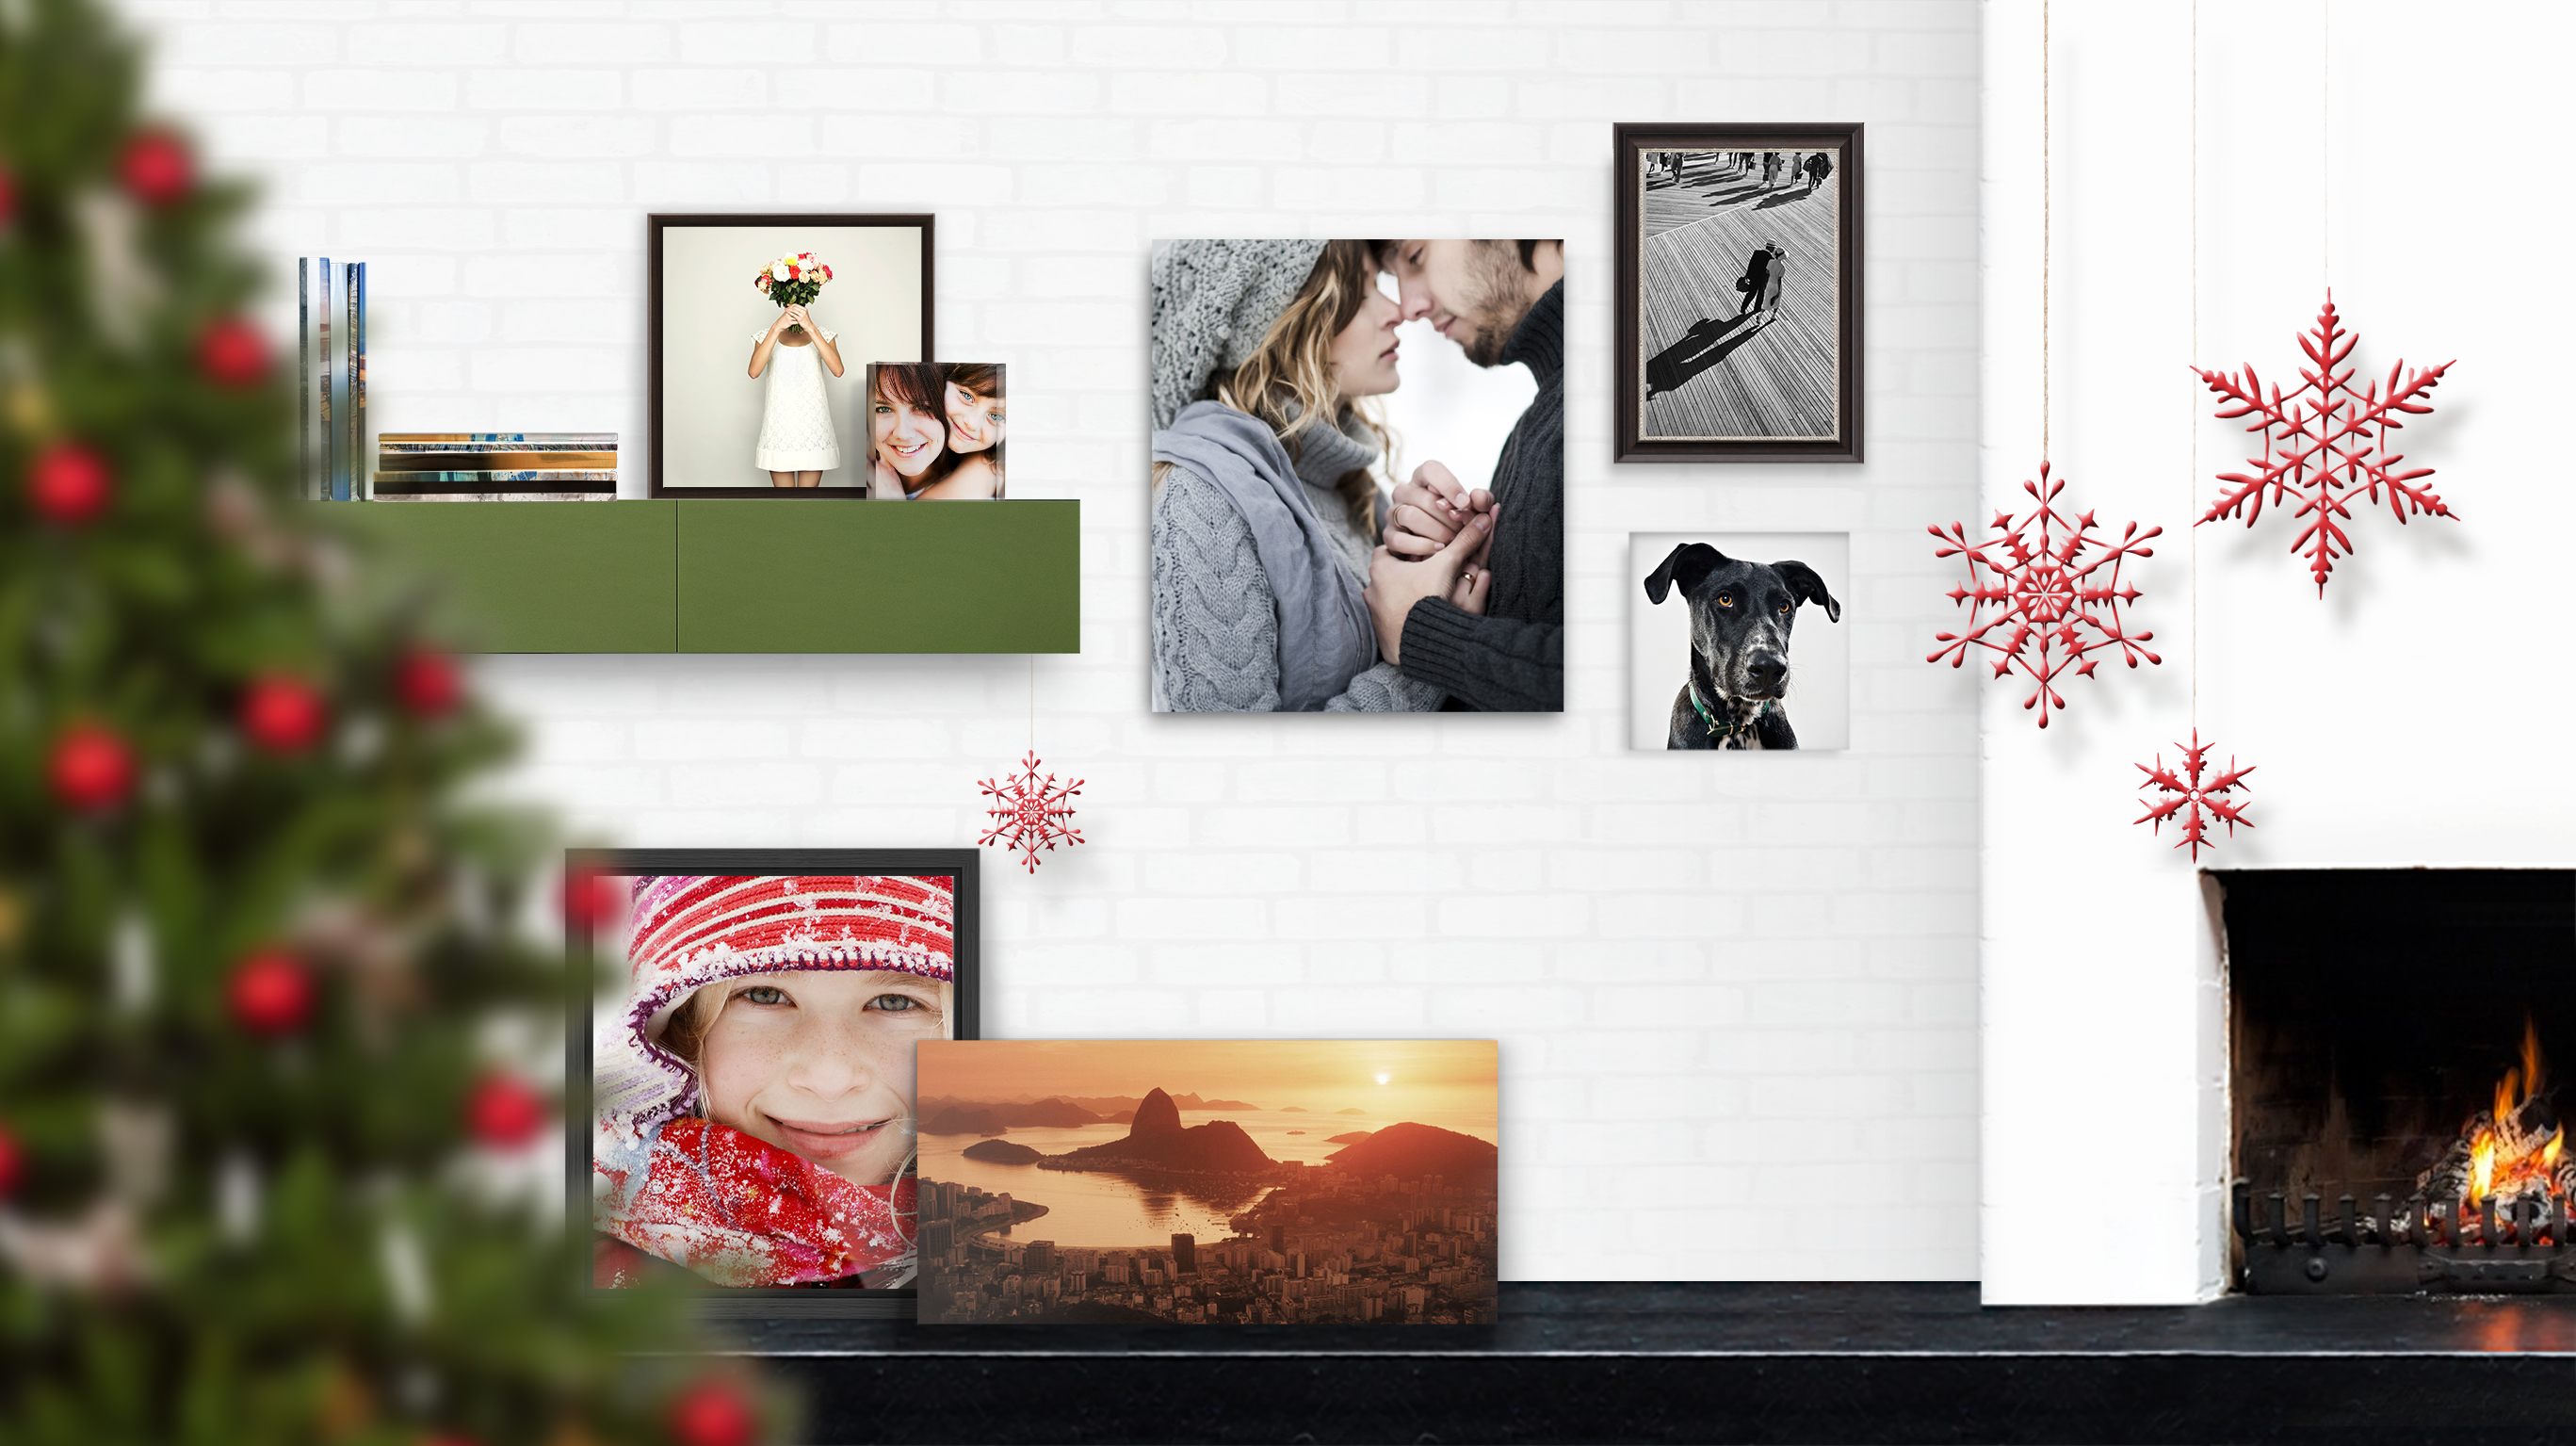 A custom print or special finish from WhiteWall will make a unique and memorable holiday gift for someone special.